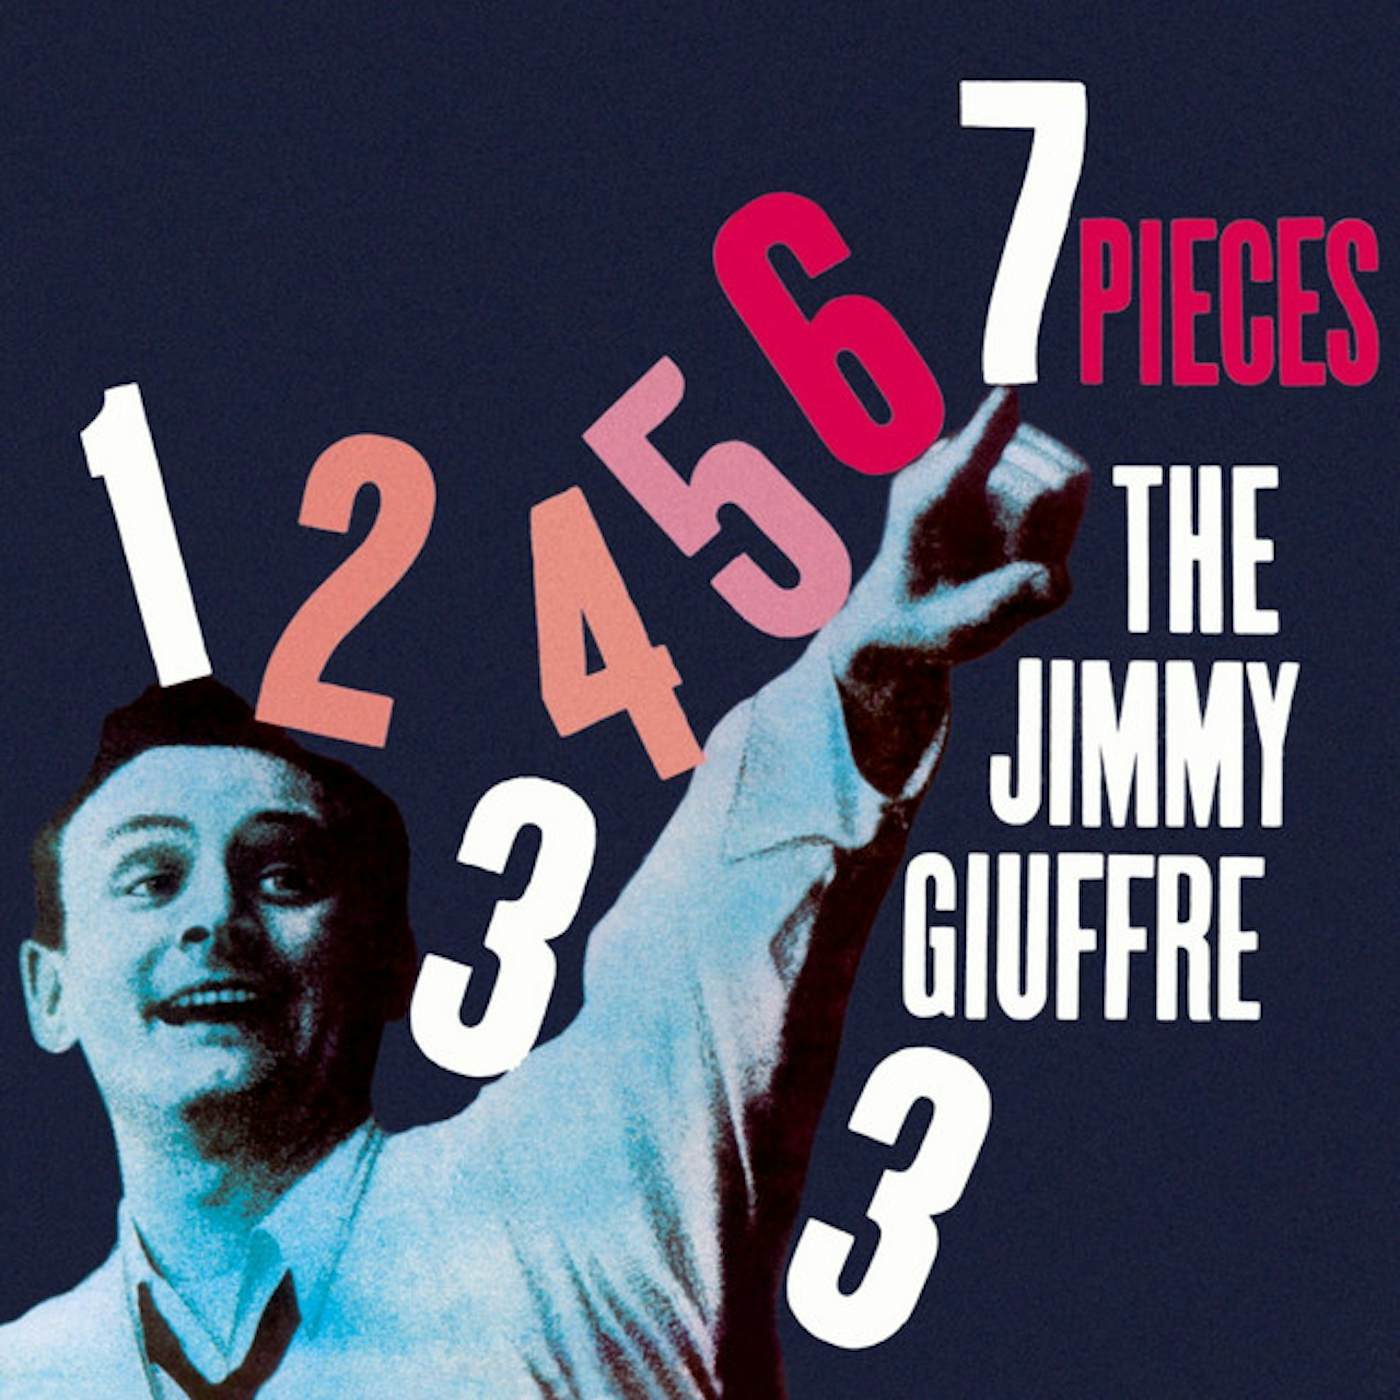 Jimmy Giuffre 7 PIECES CD